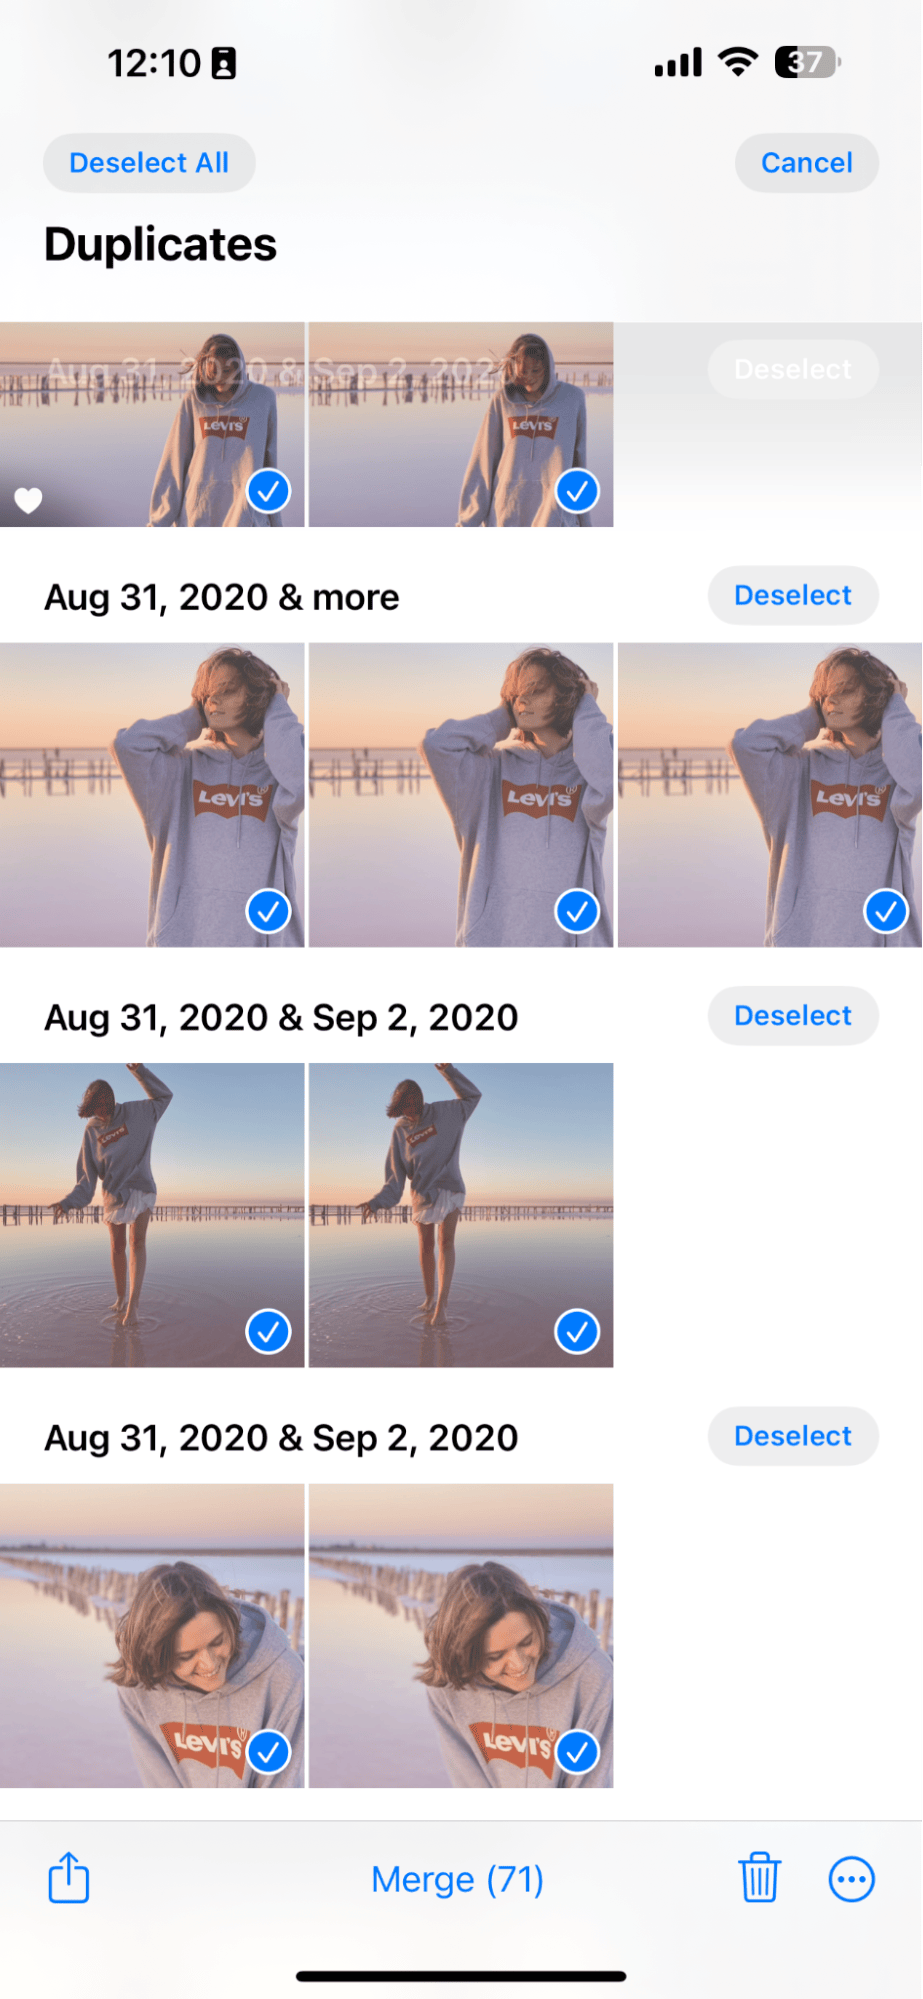 How to merge duplicate photos on iPhone